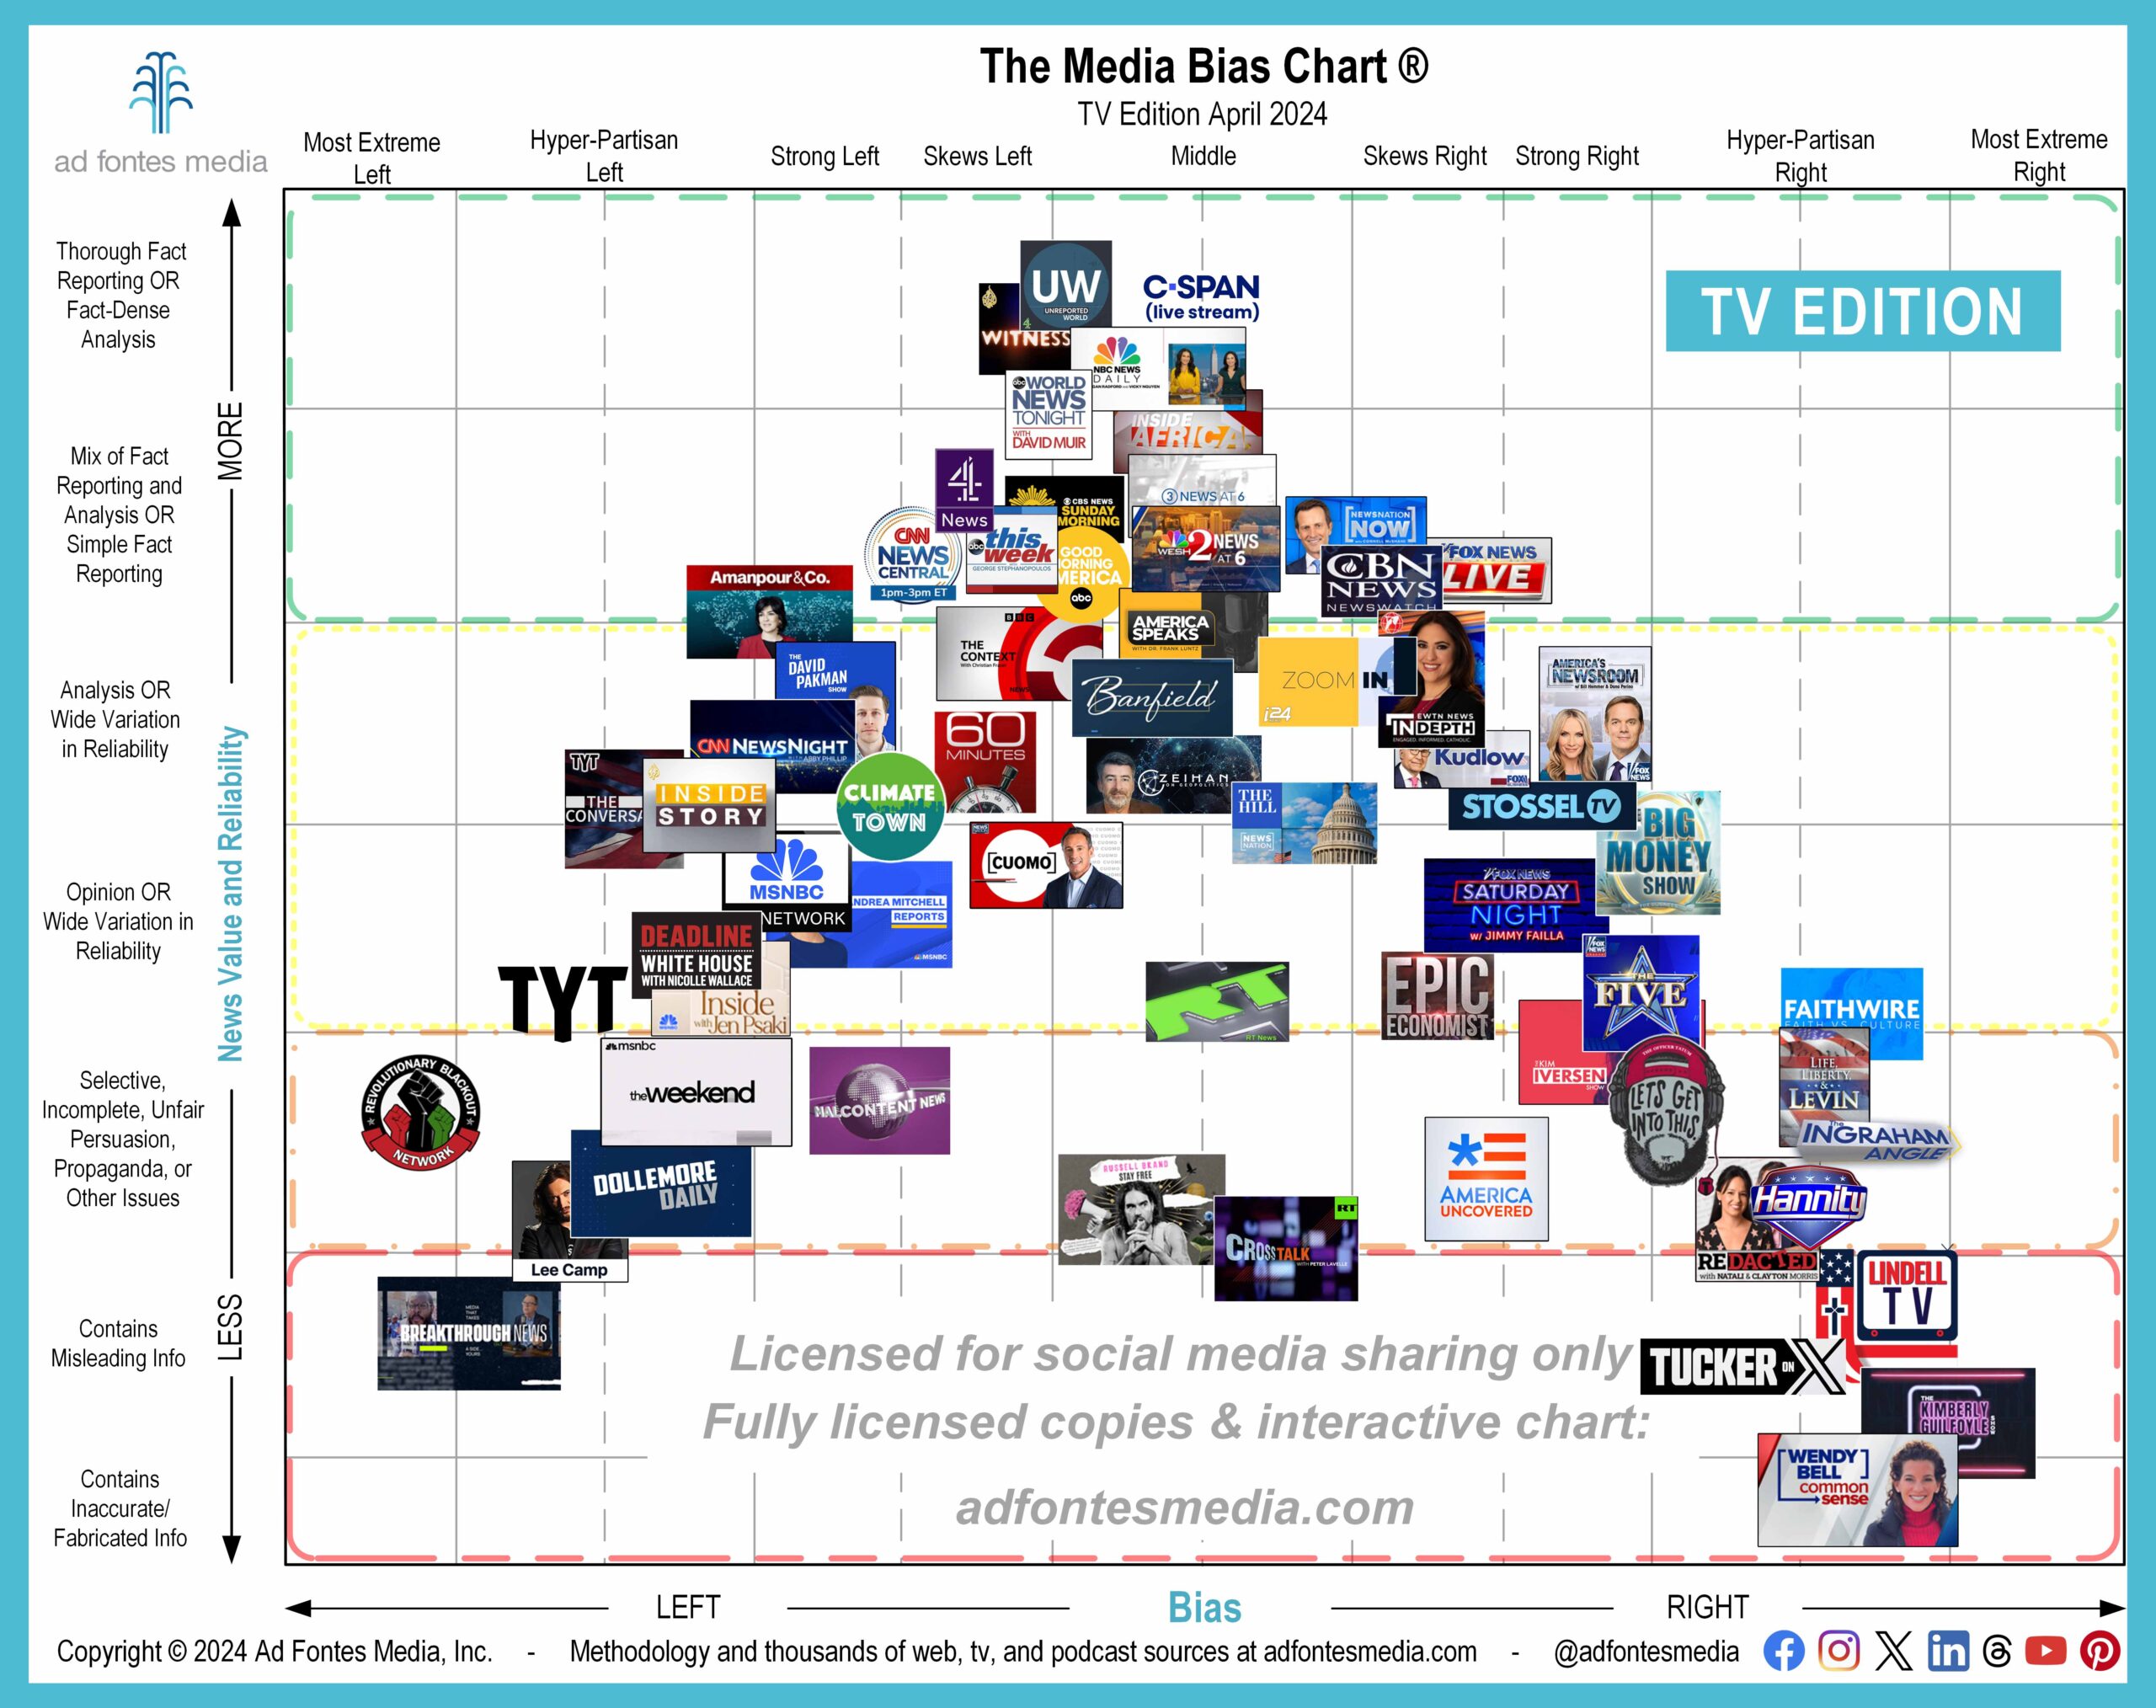 Ad Fontes Media features 64 sources on monthly TV/video Media Bias Chart